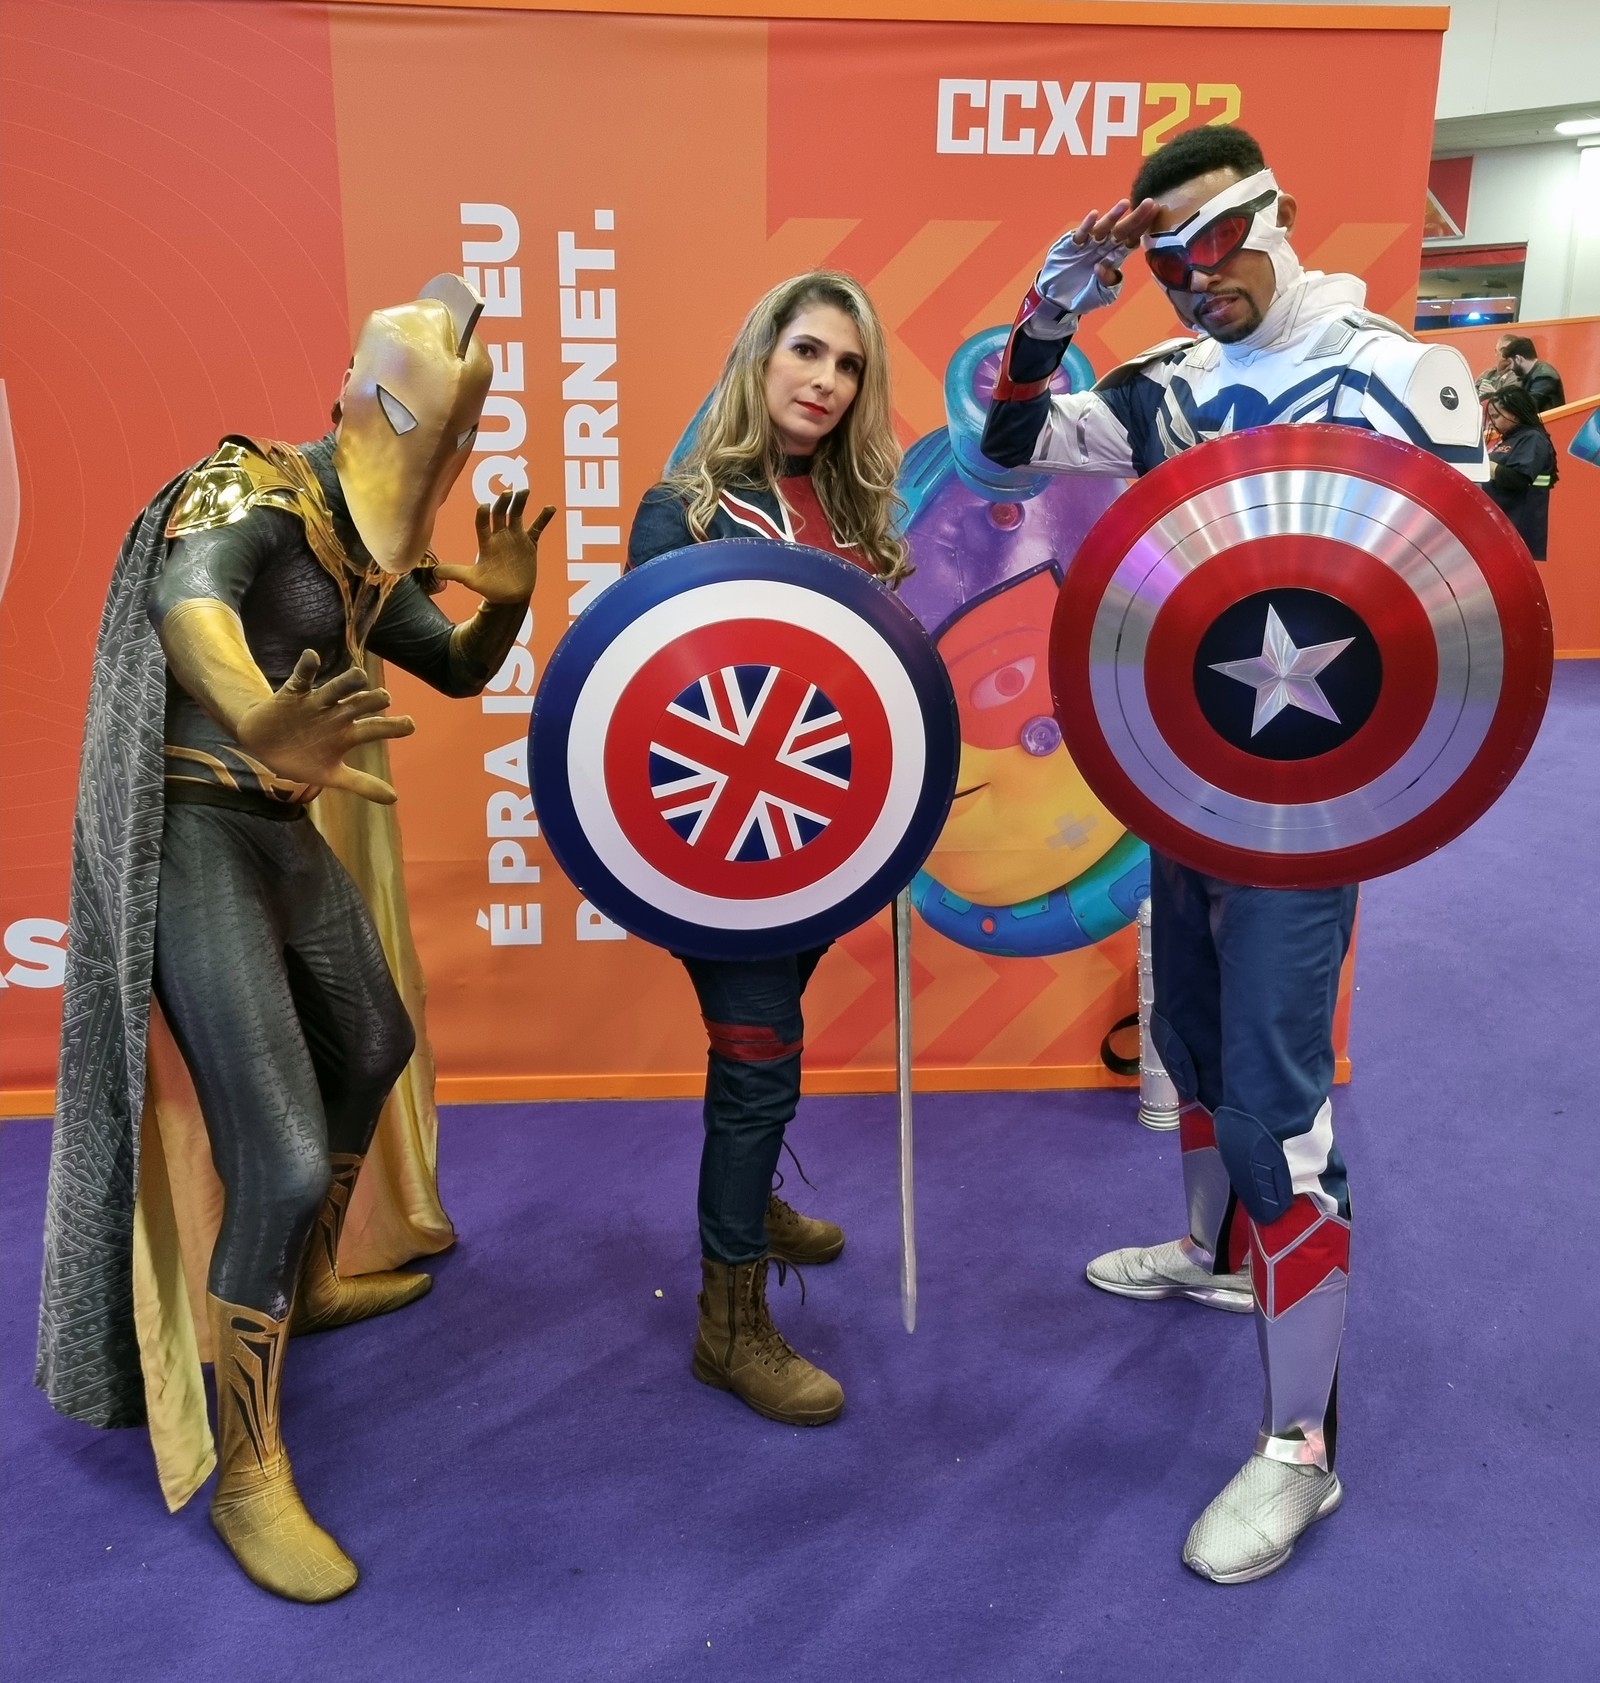 Cosplayers concentraram holofotes na CCXP22 | Na foto: @israel_cosplay, @vinycosplay e @kmussi.cosplay | formam grupo com @m.mussicosplay — Foto: MONET